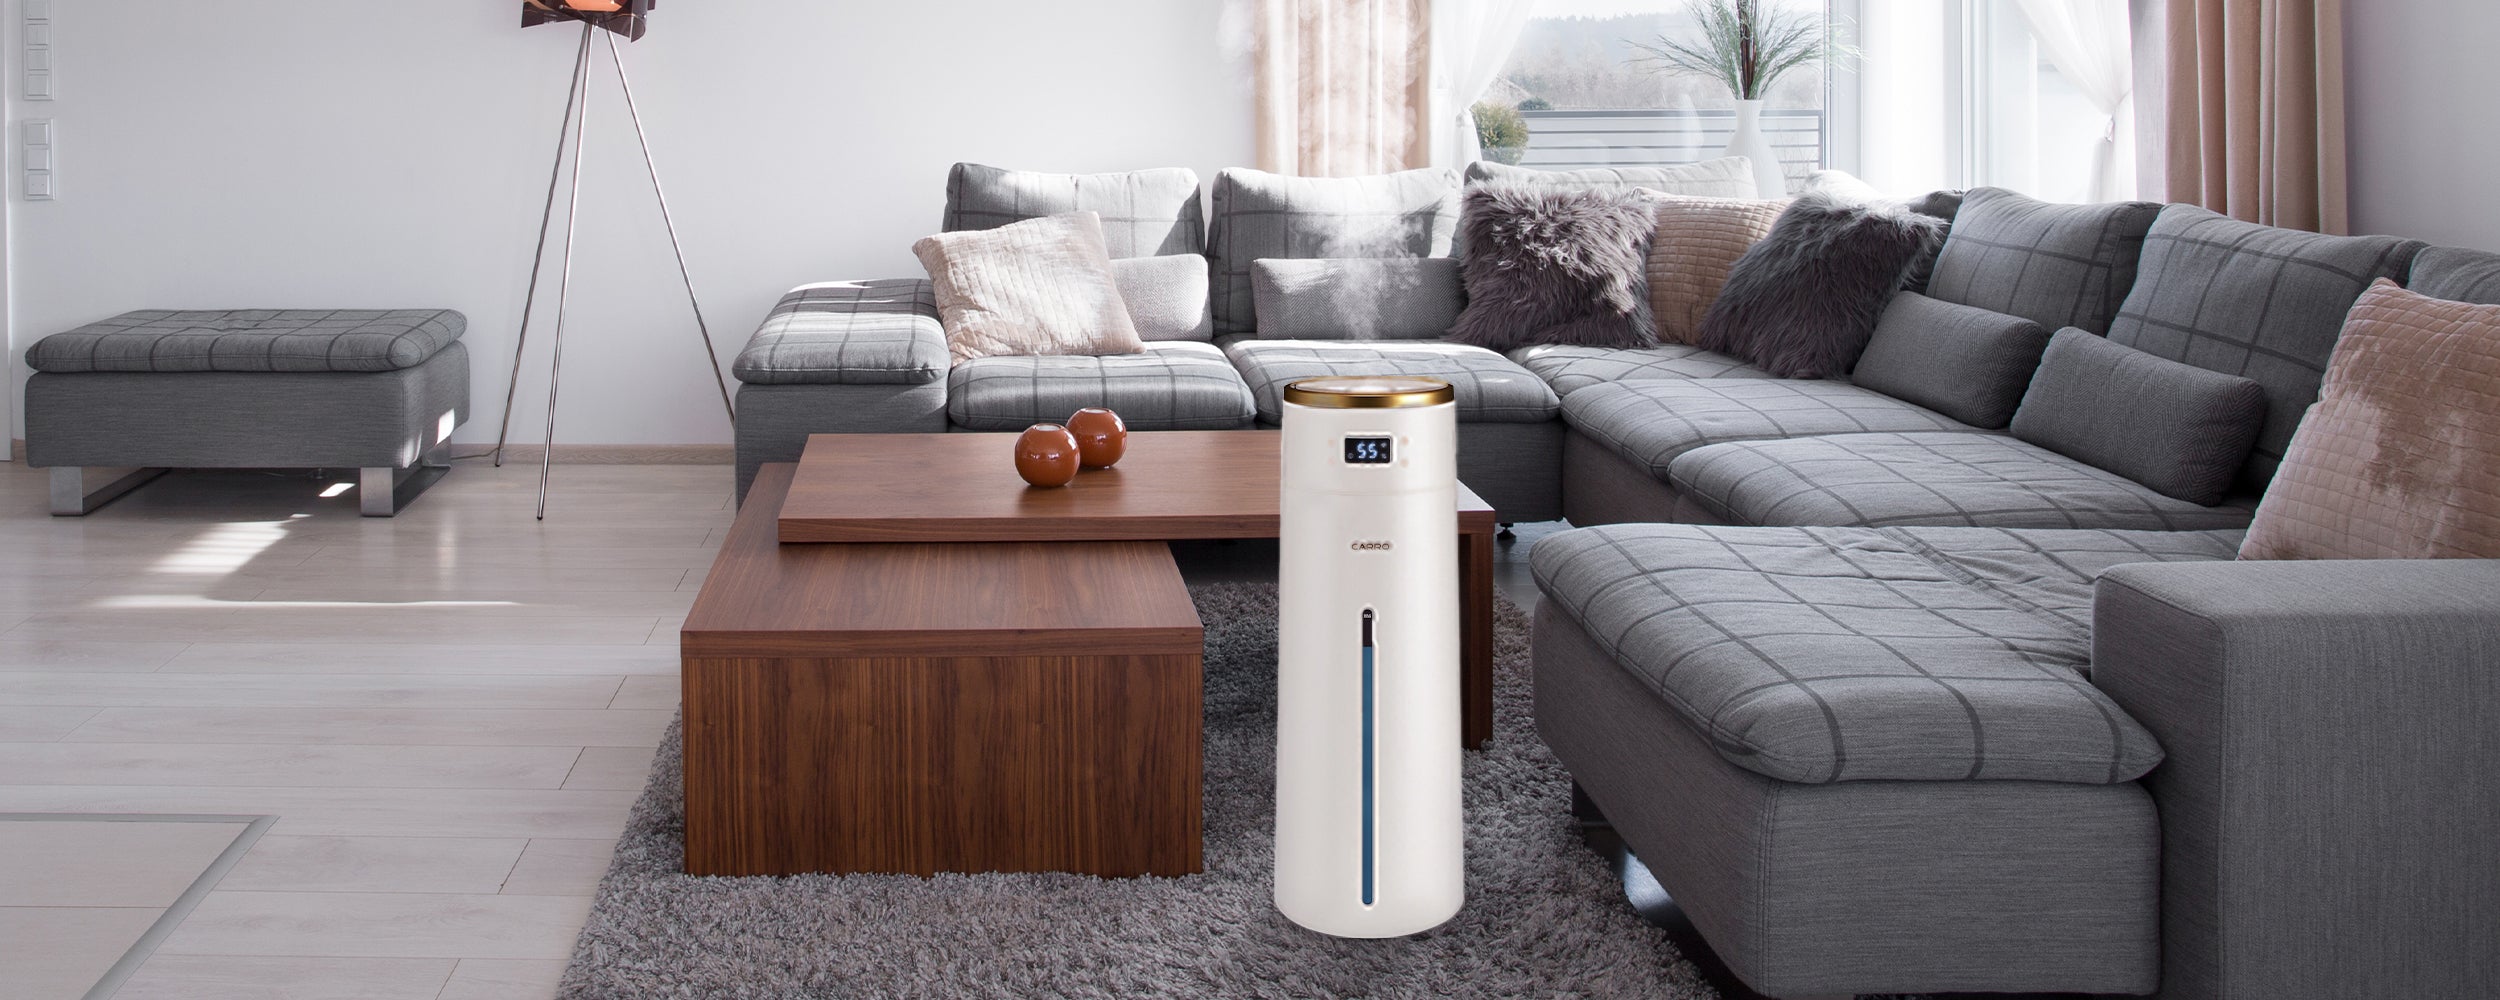 Best Humidifier for Bedroom 2023: Eliminate Dry Air While Sleeping